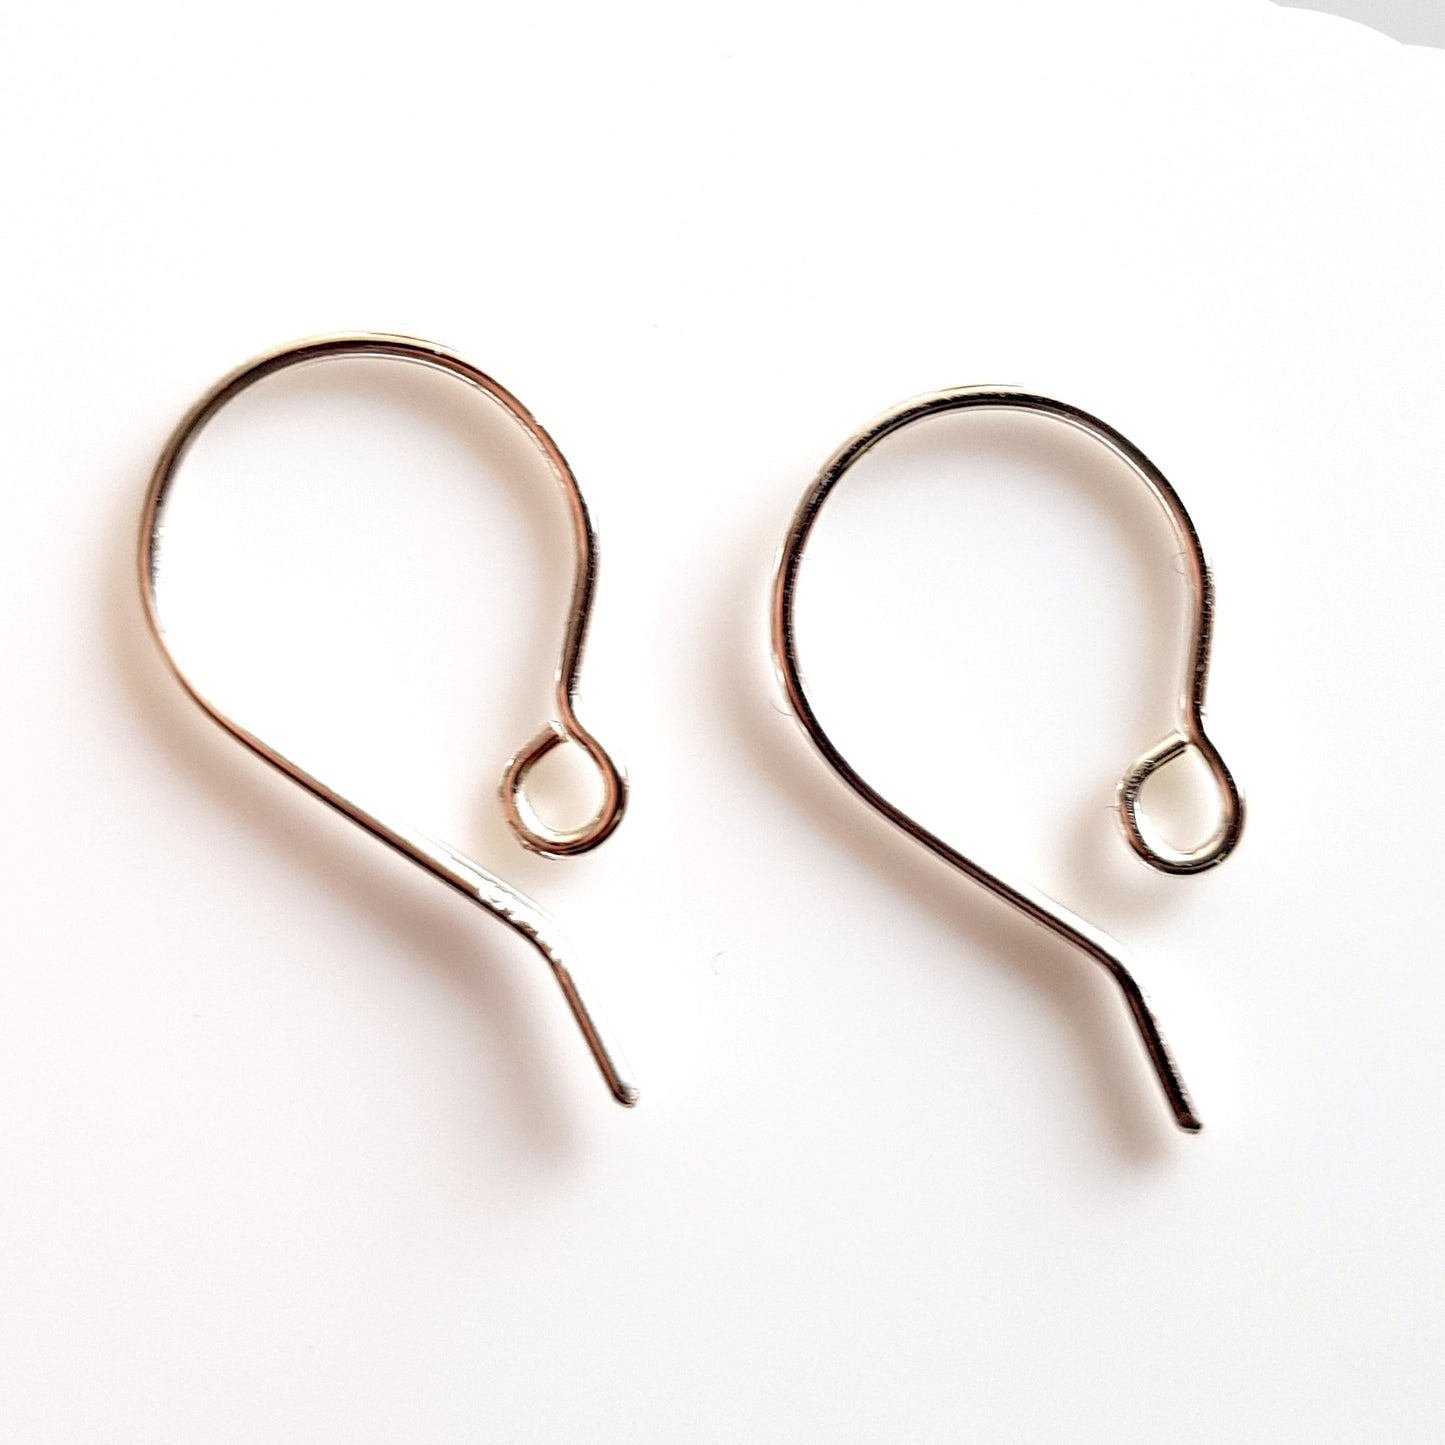 Quality Solid Silver 925 Handmade Earring Hooks | SS-023EH | Jewellery Supply - Kalitheo Jewellery